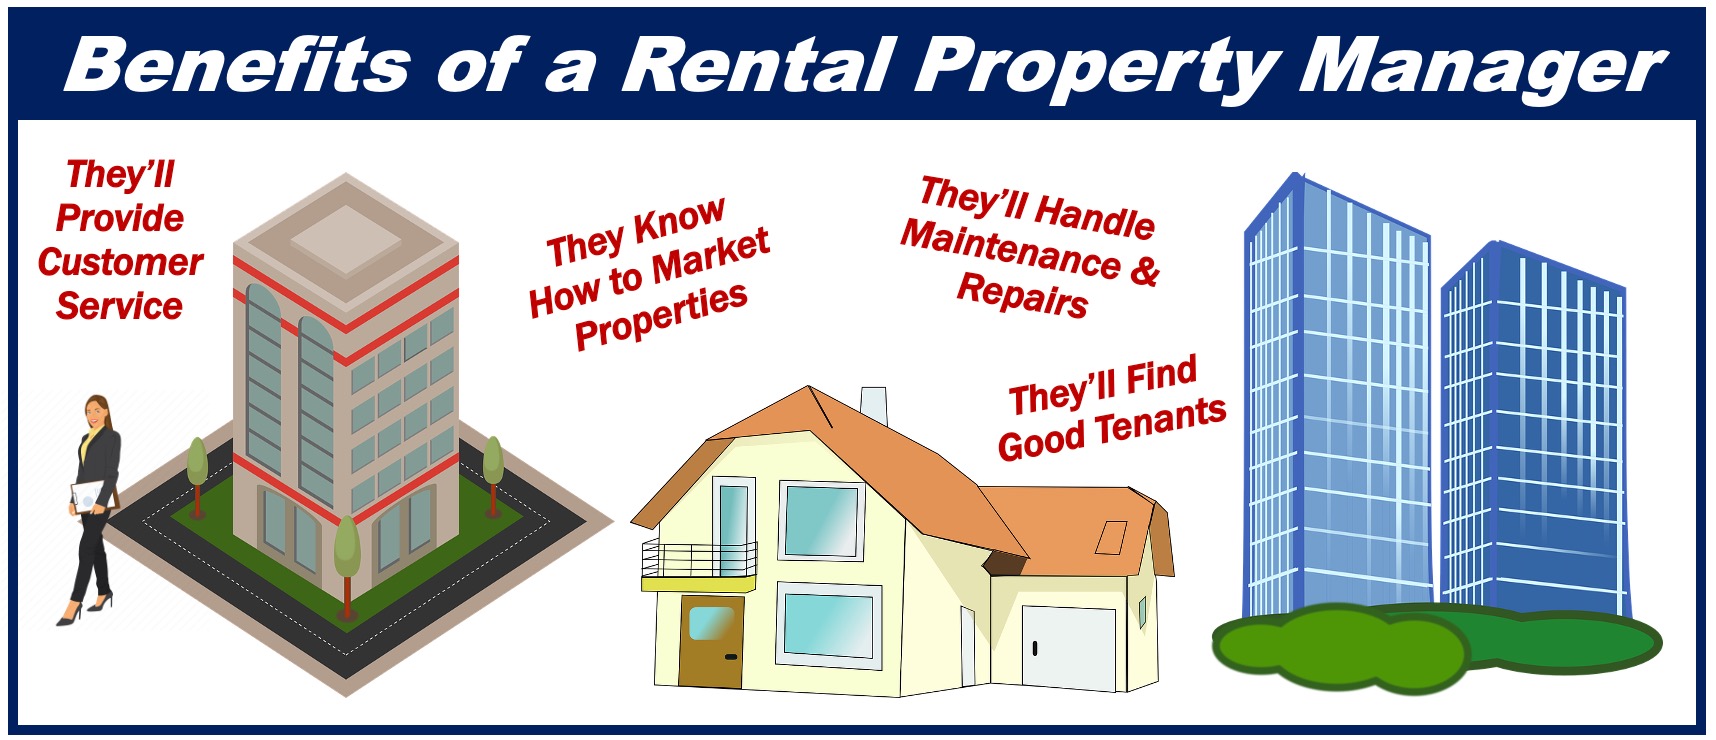 What Benefits Rental Property Manager